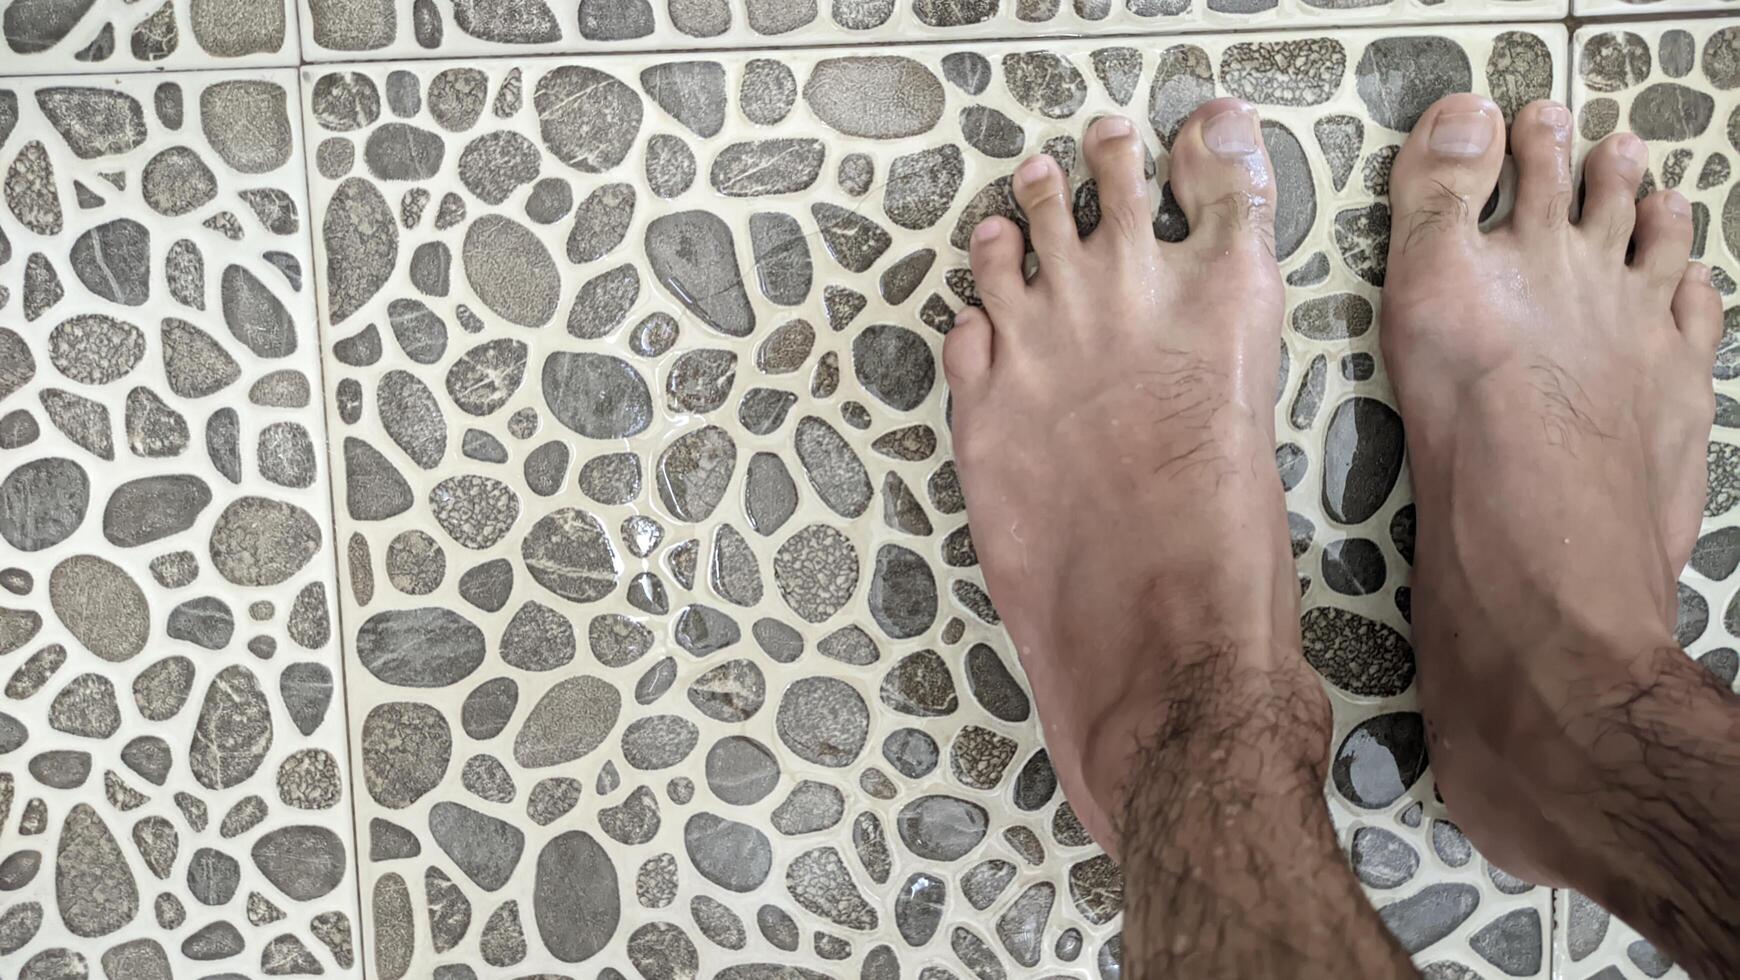 A bird's-eye view of tanned human feet standing on uniquely shaped ash tiles in a bathroom with water splashing and running down the drain. photo